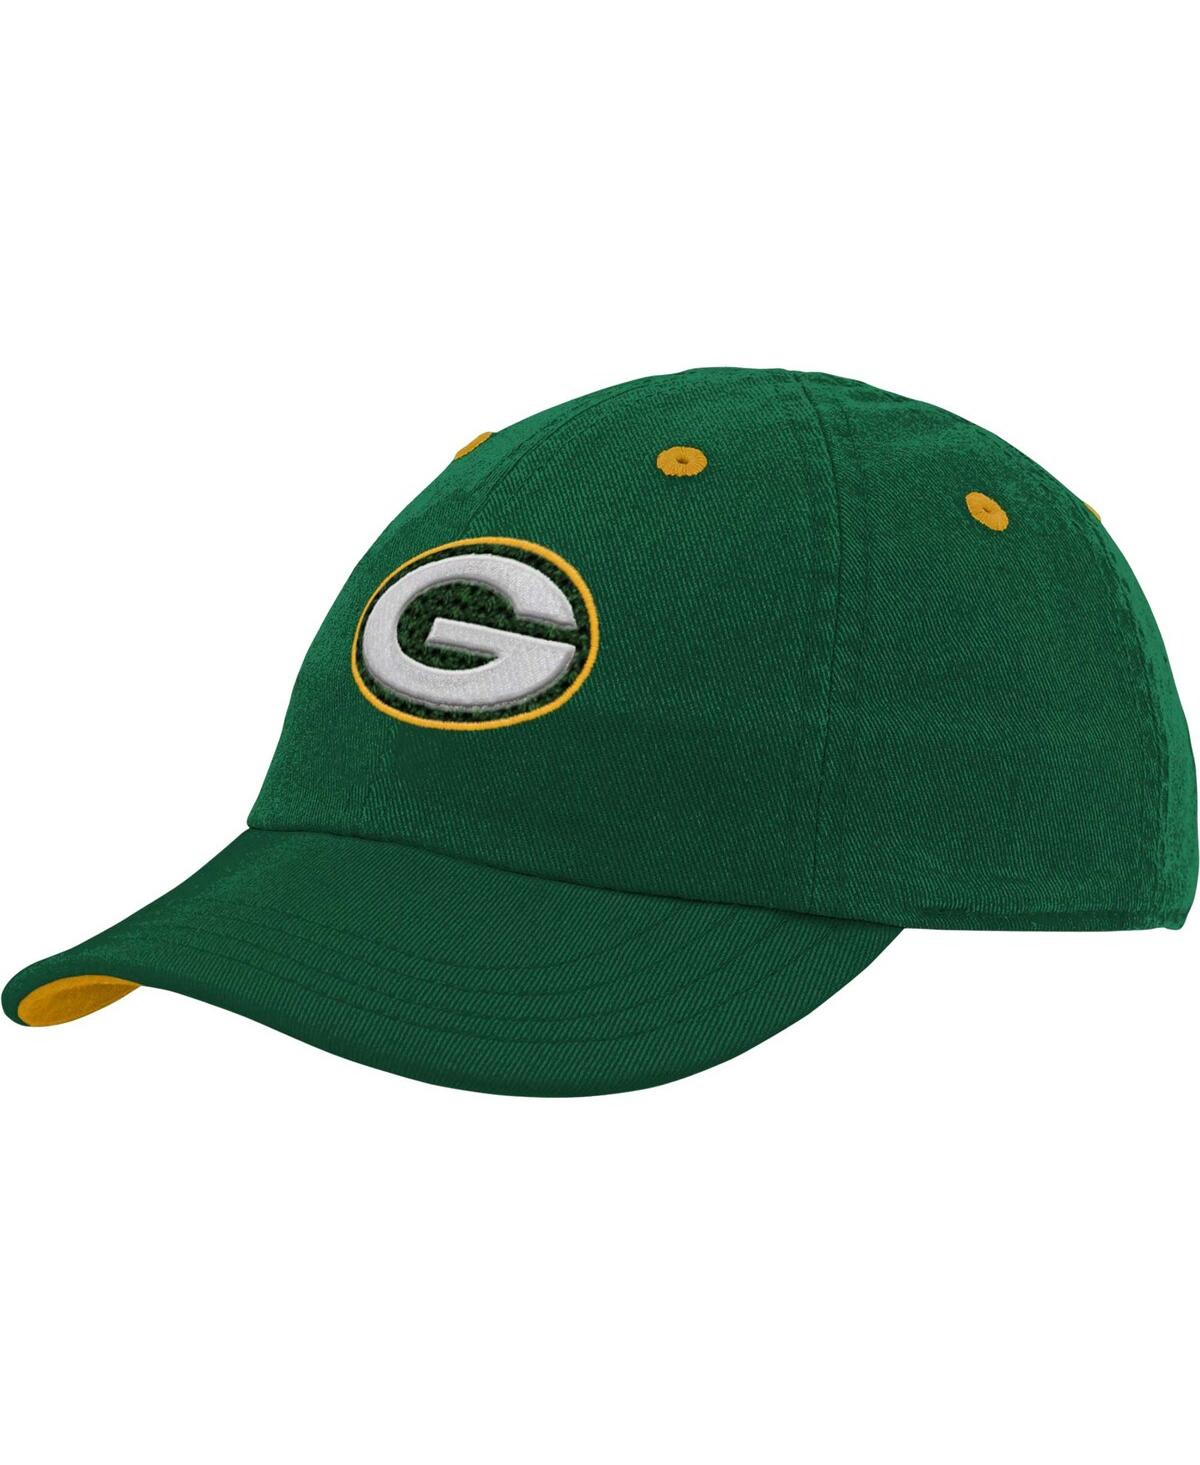 Outerstuff Babies' Boys And Girls Infant Green Green Bay Packers Team Slouch Flex Hat